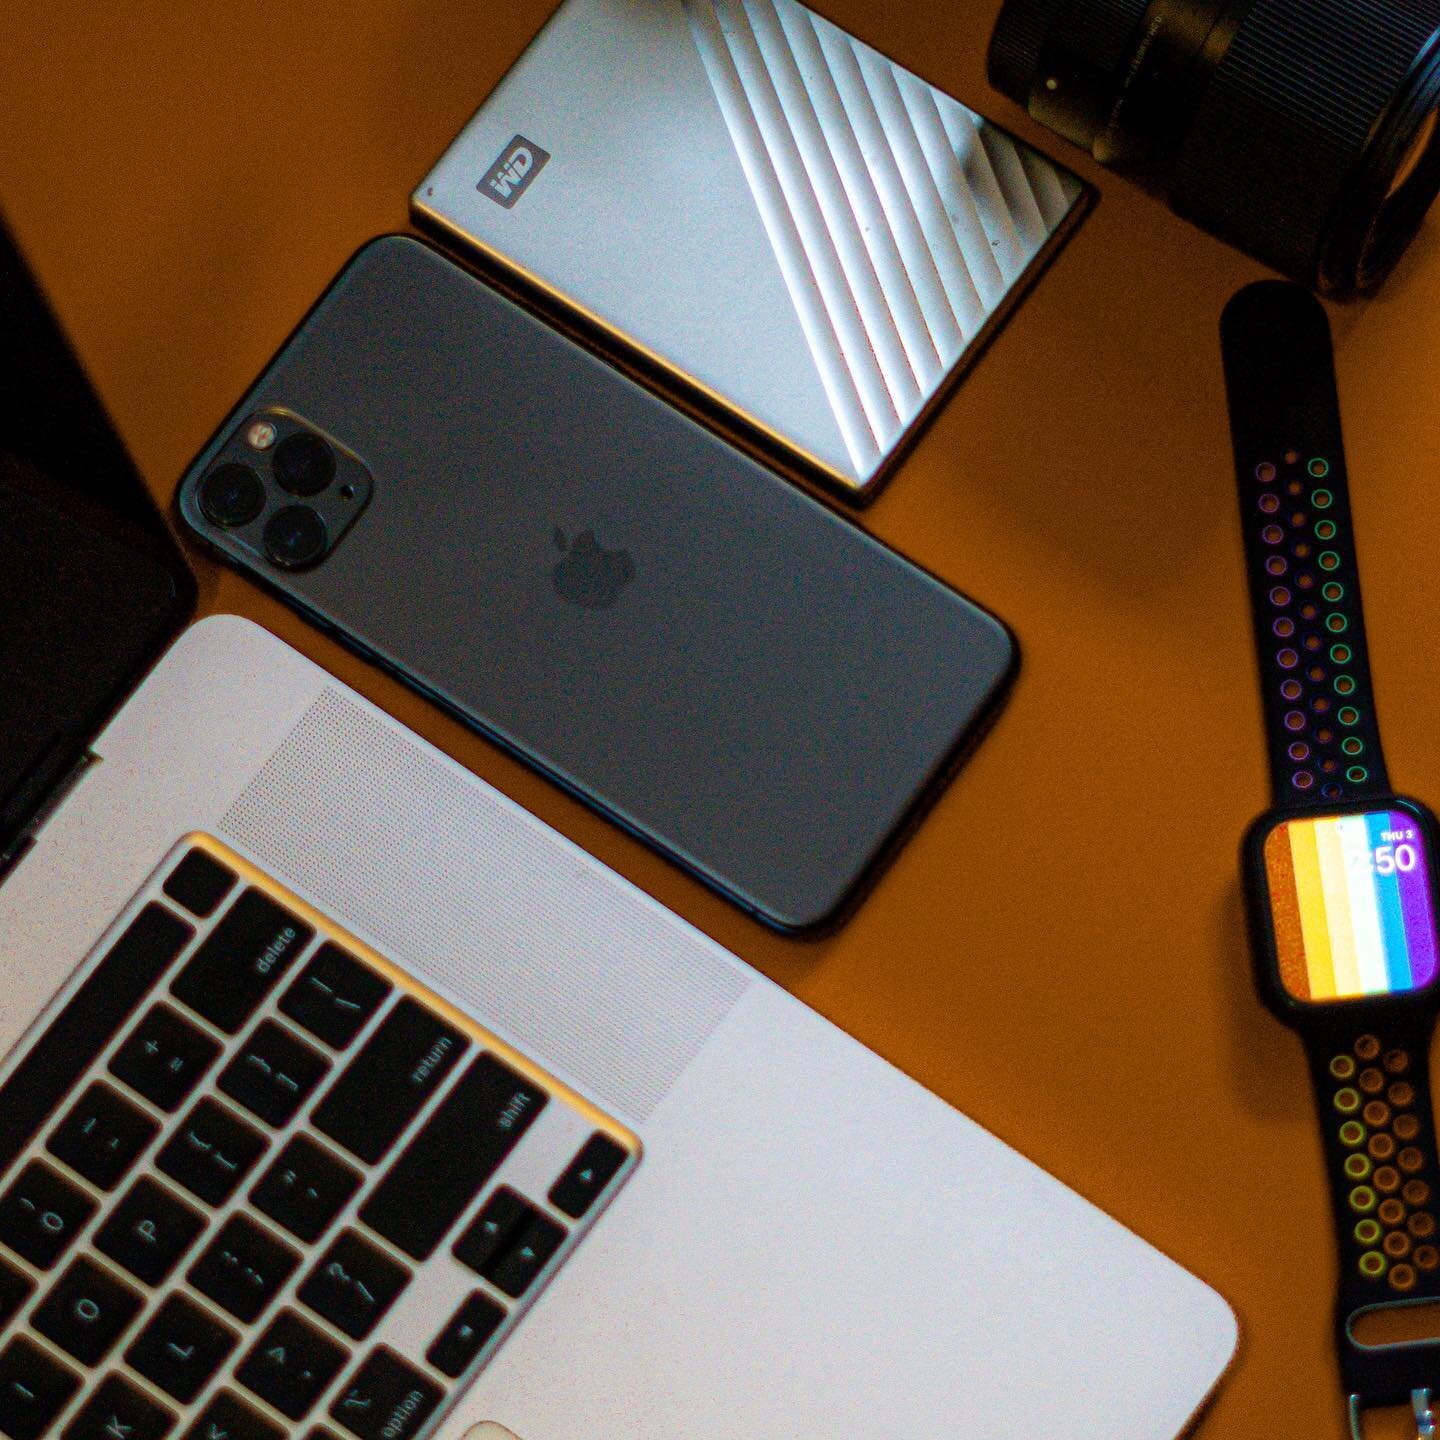 What&rsquo;s your product flow?

#apple #macbook #applewatch #iphone #wdharddrive #pride